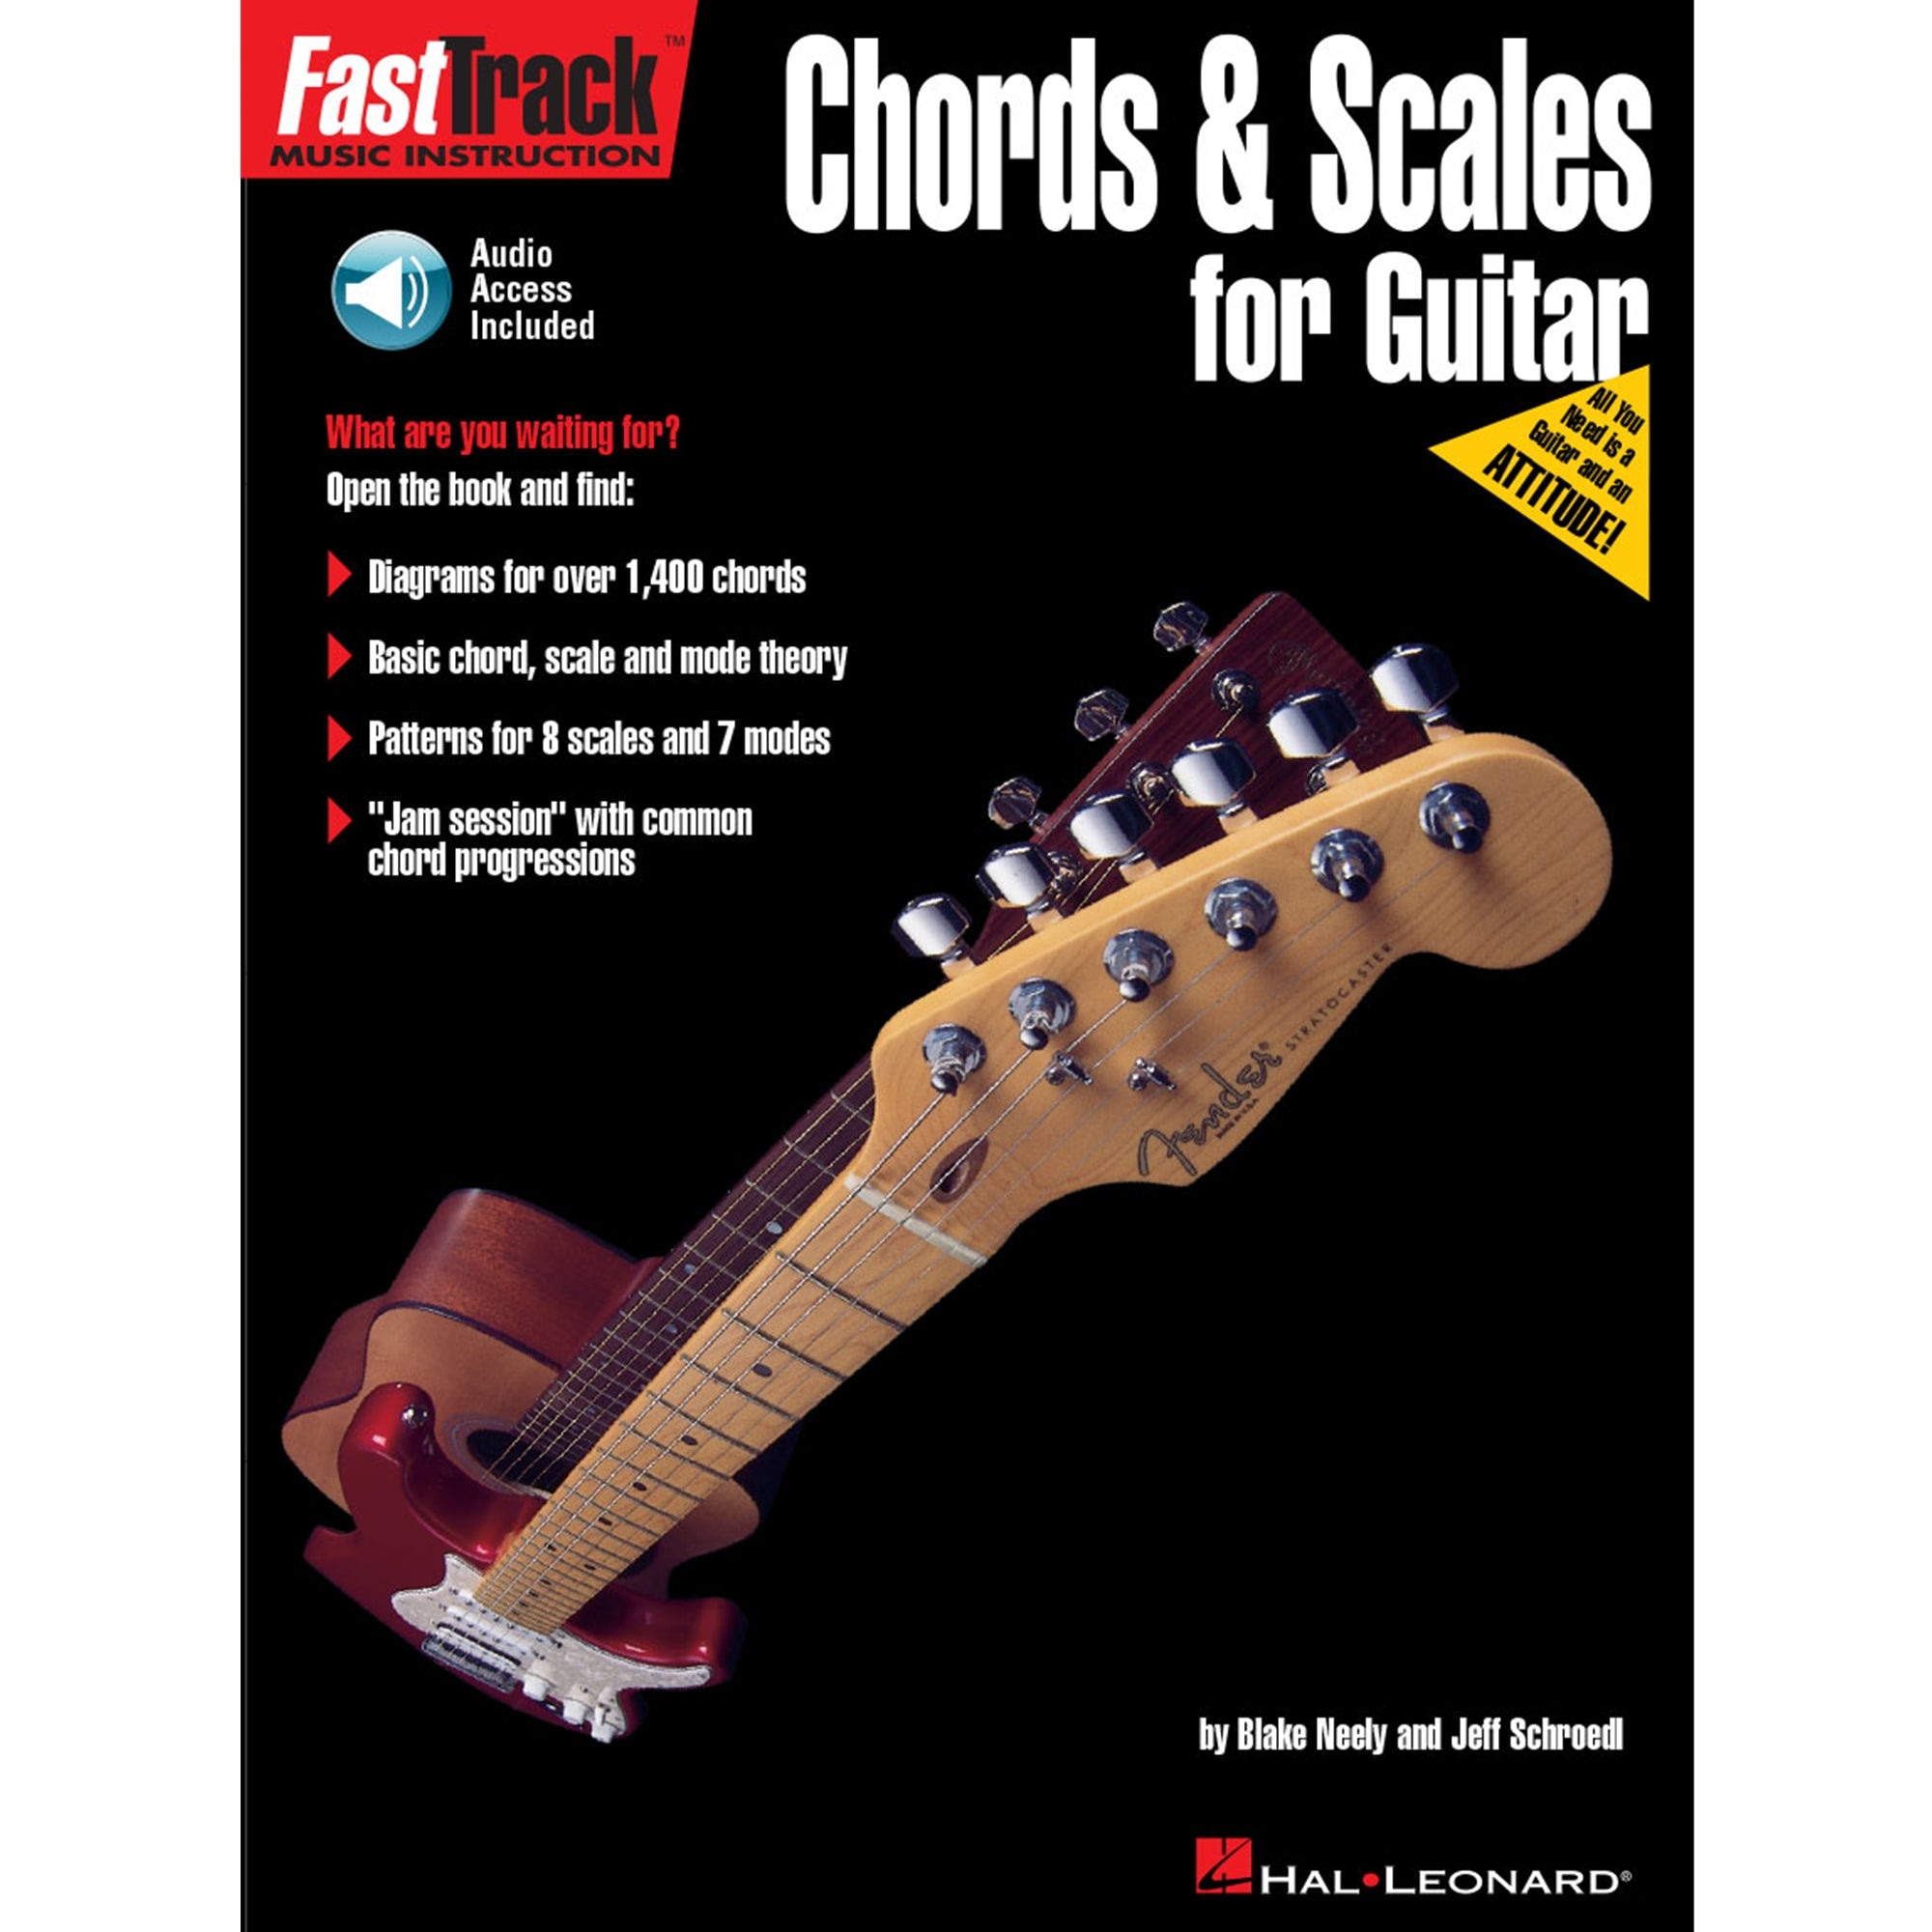 HAL LEONARD 697291 Fast Track Guitar Method - Chords and Scales w/ CD